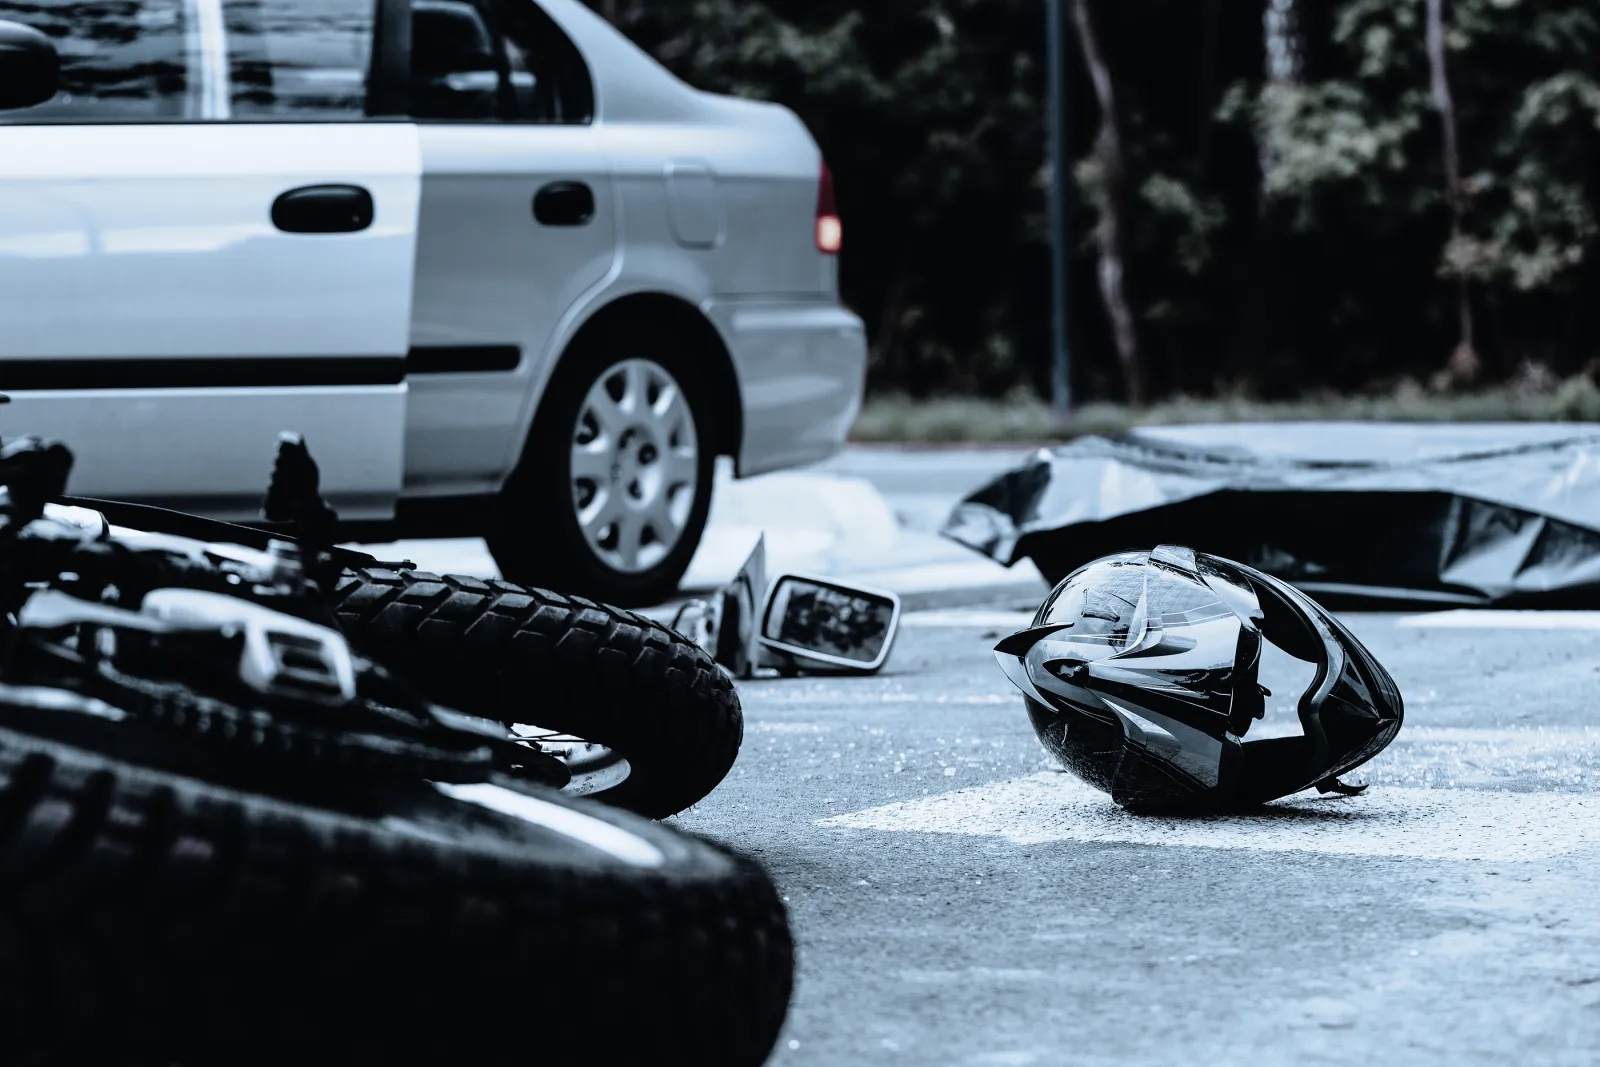 How many motorcycle accidents are the riders' fault?